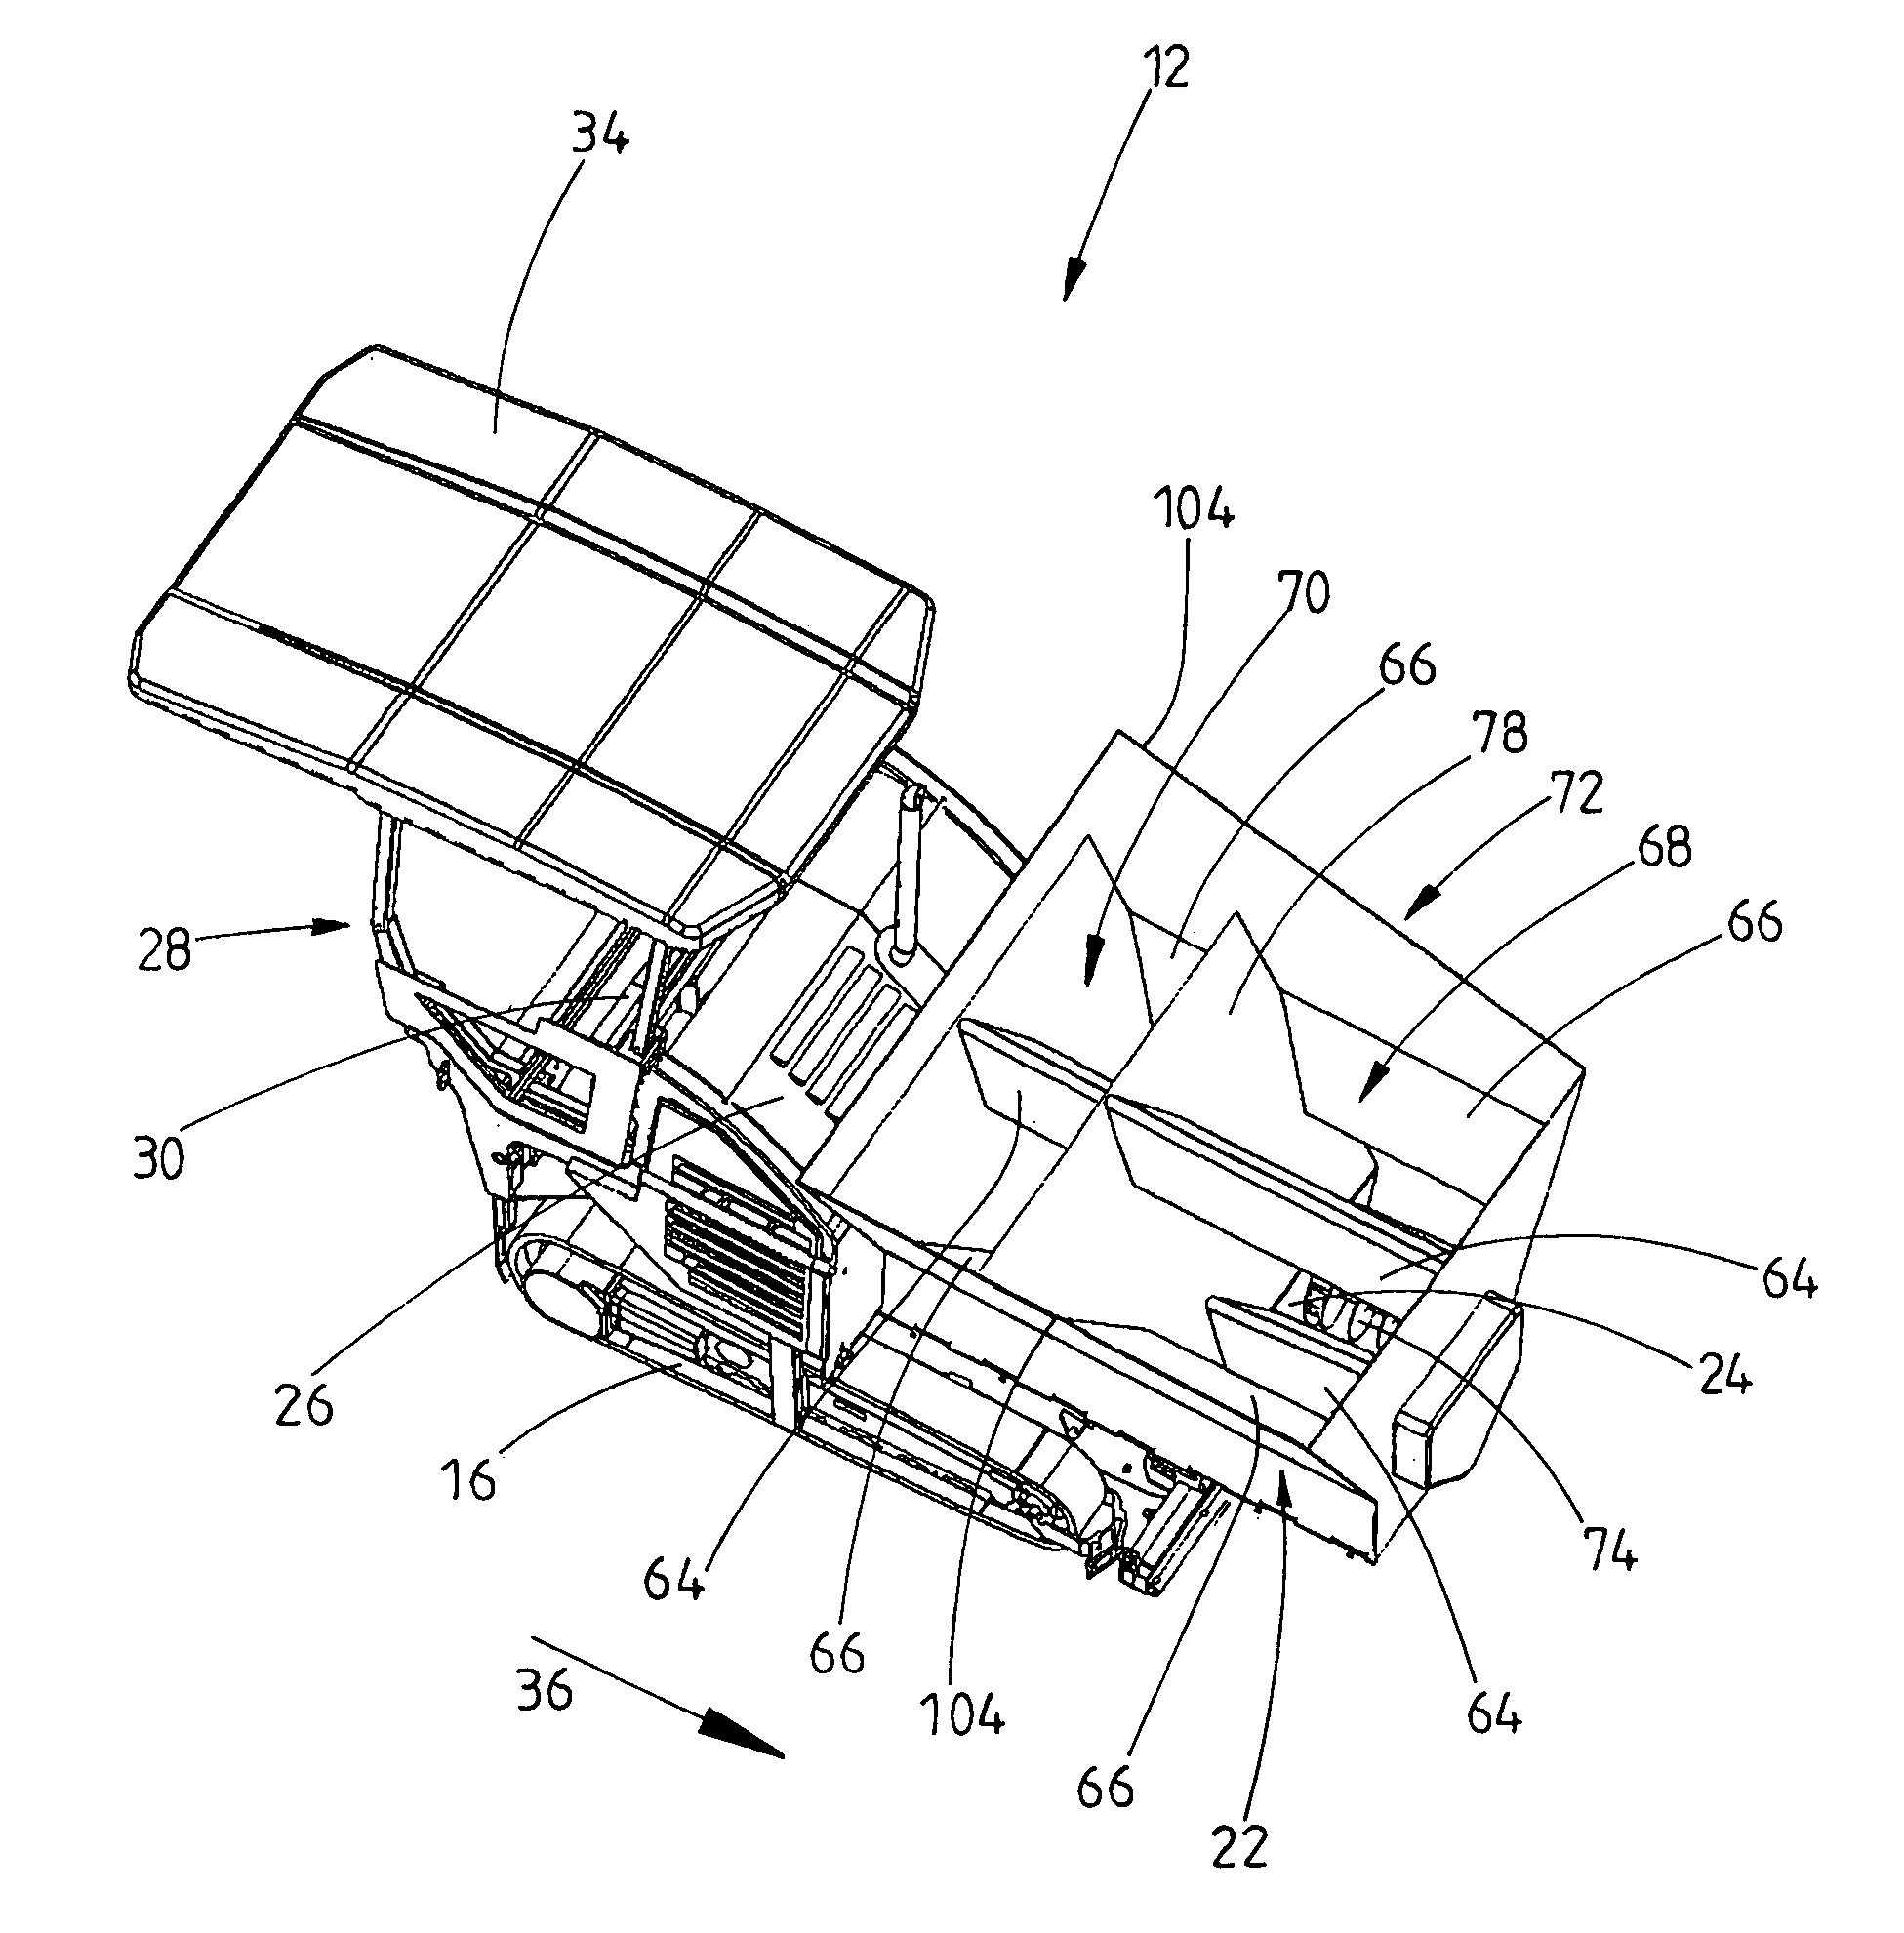 Process for producing a road covering, feeder, road paver and paving train